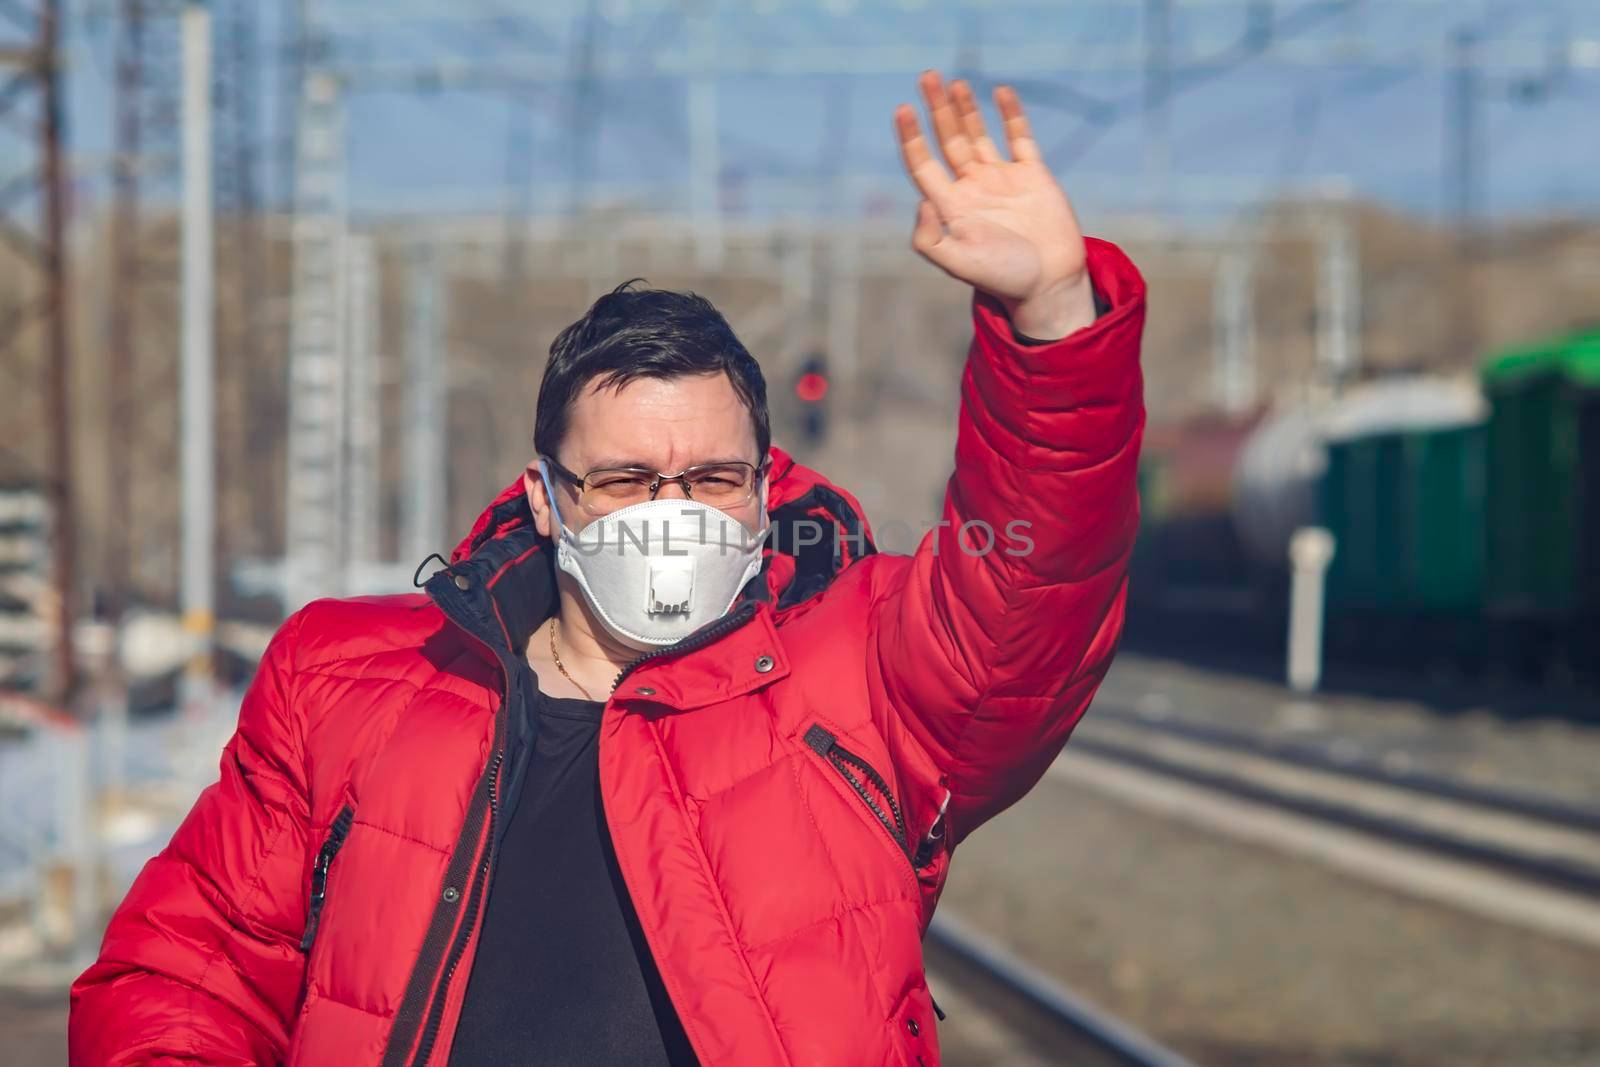 a man in a medical mask waves on the platform of a railway station by jk3030